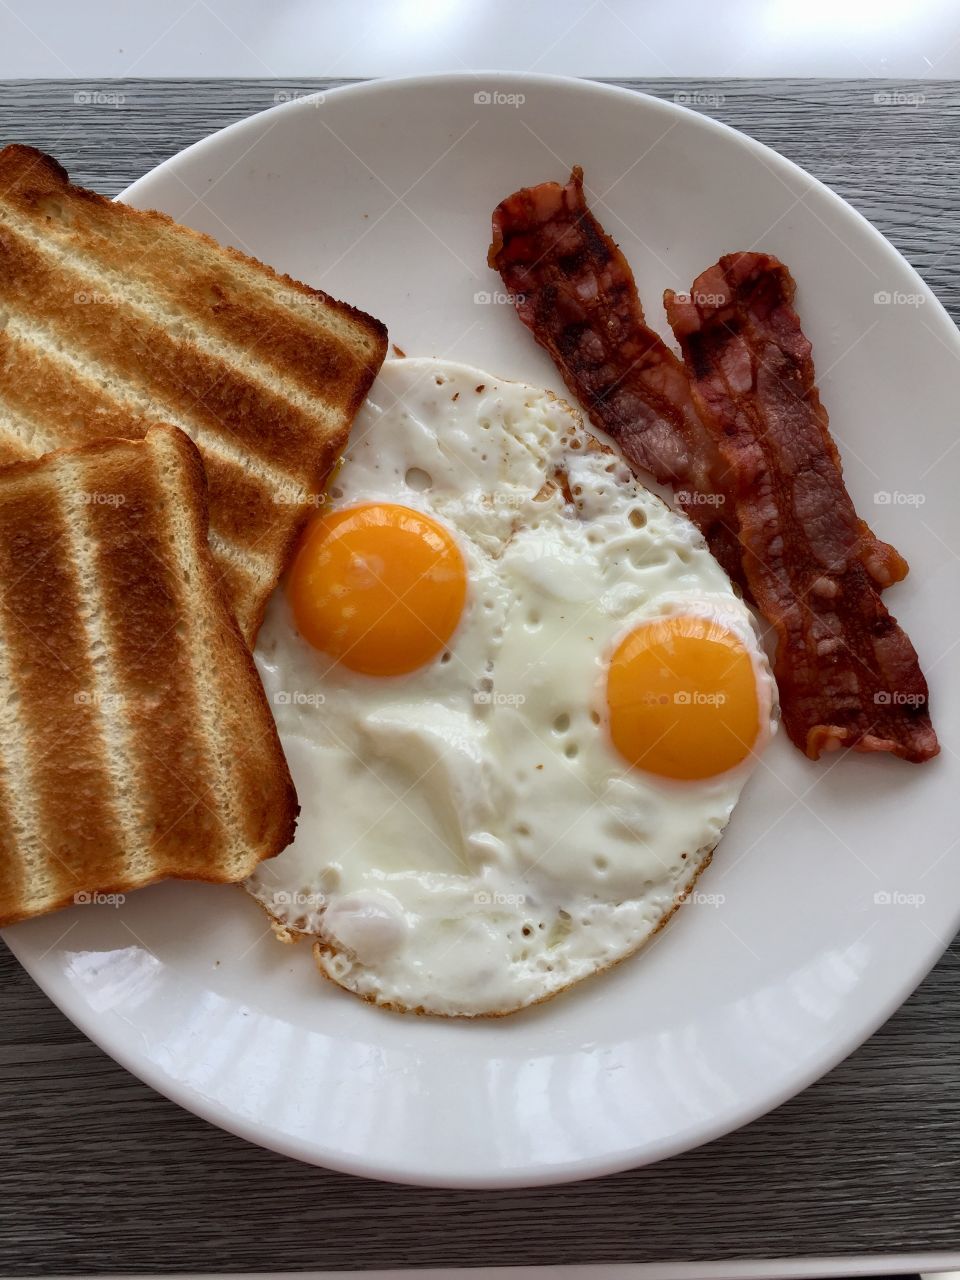 Classic Bacon and Eggs w/ Toast